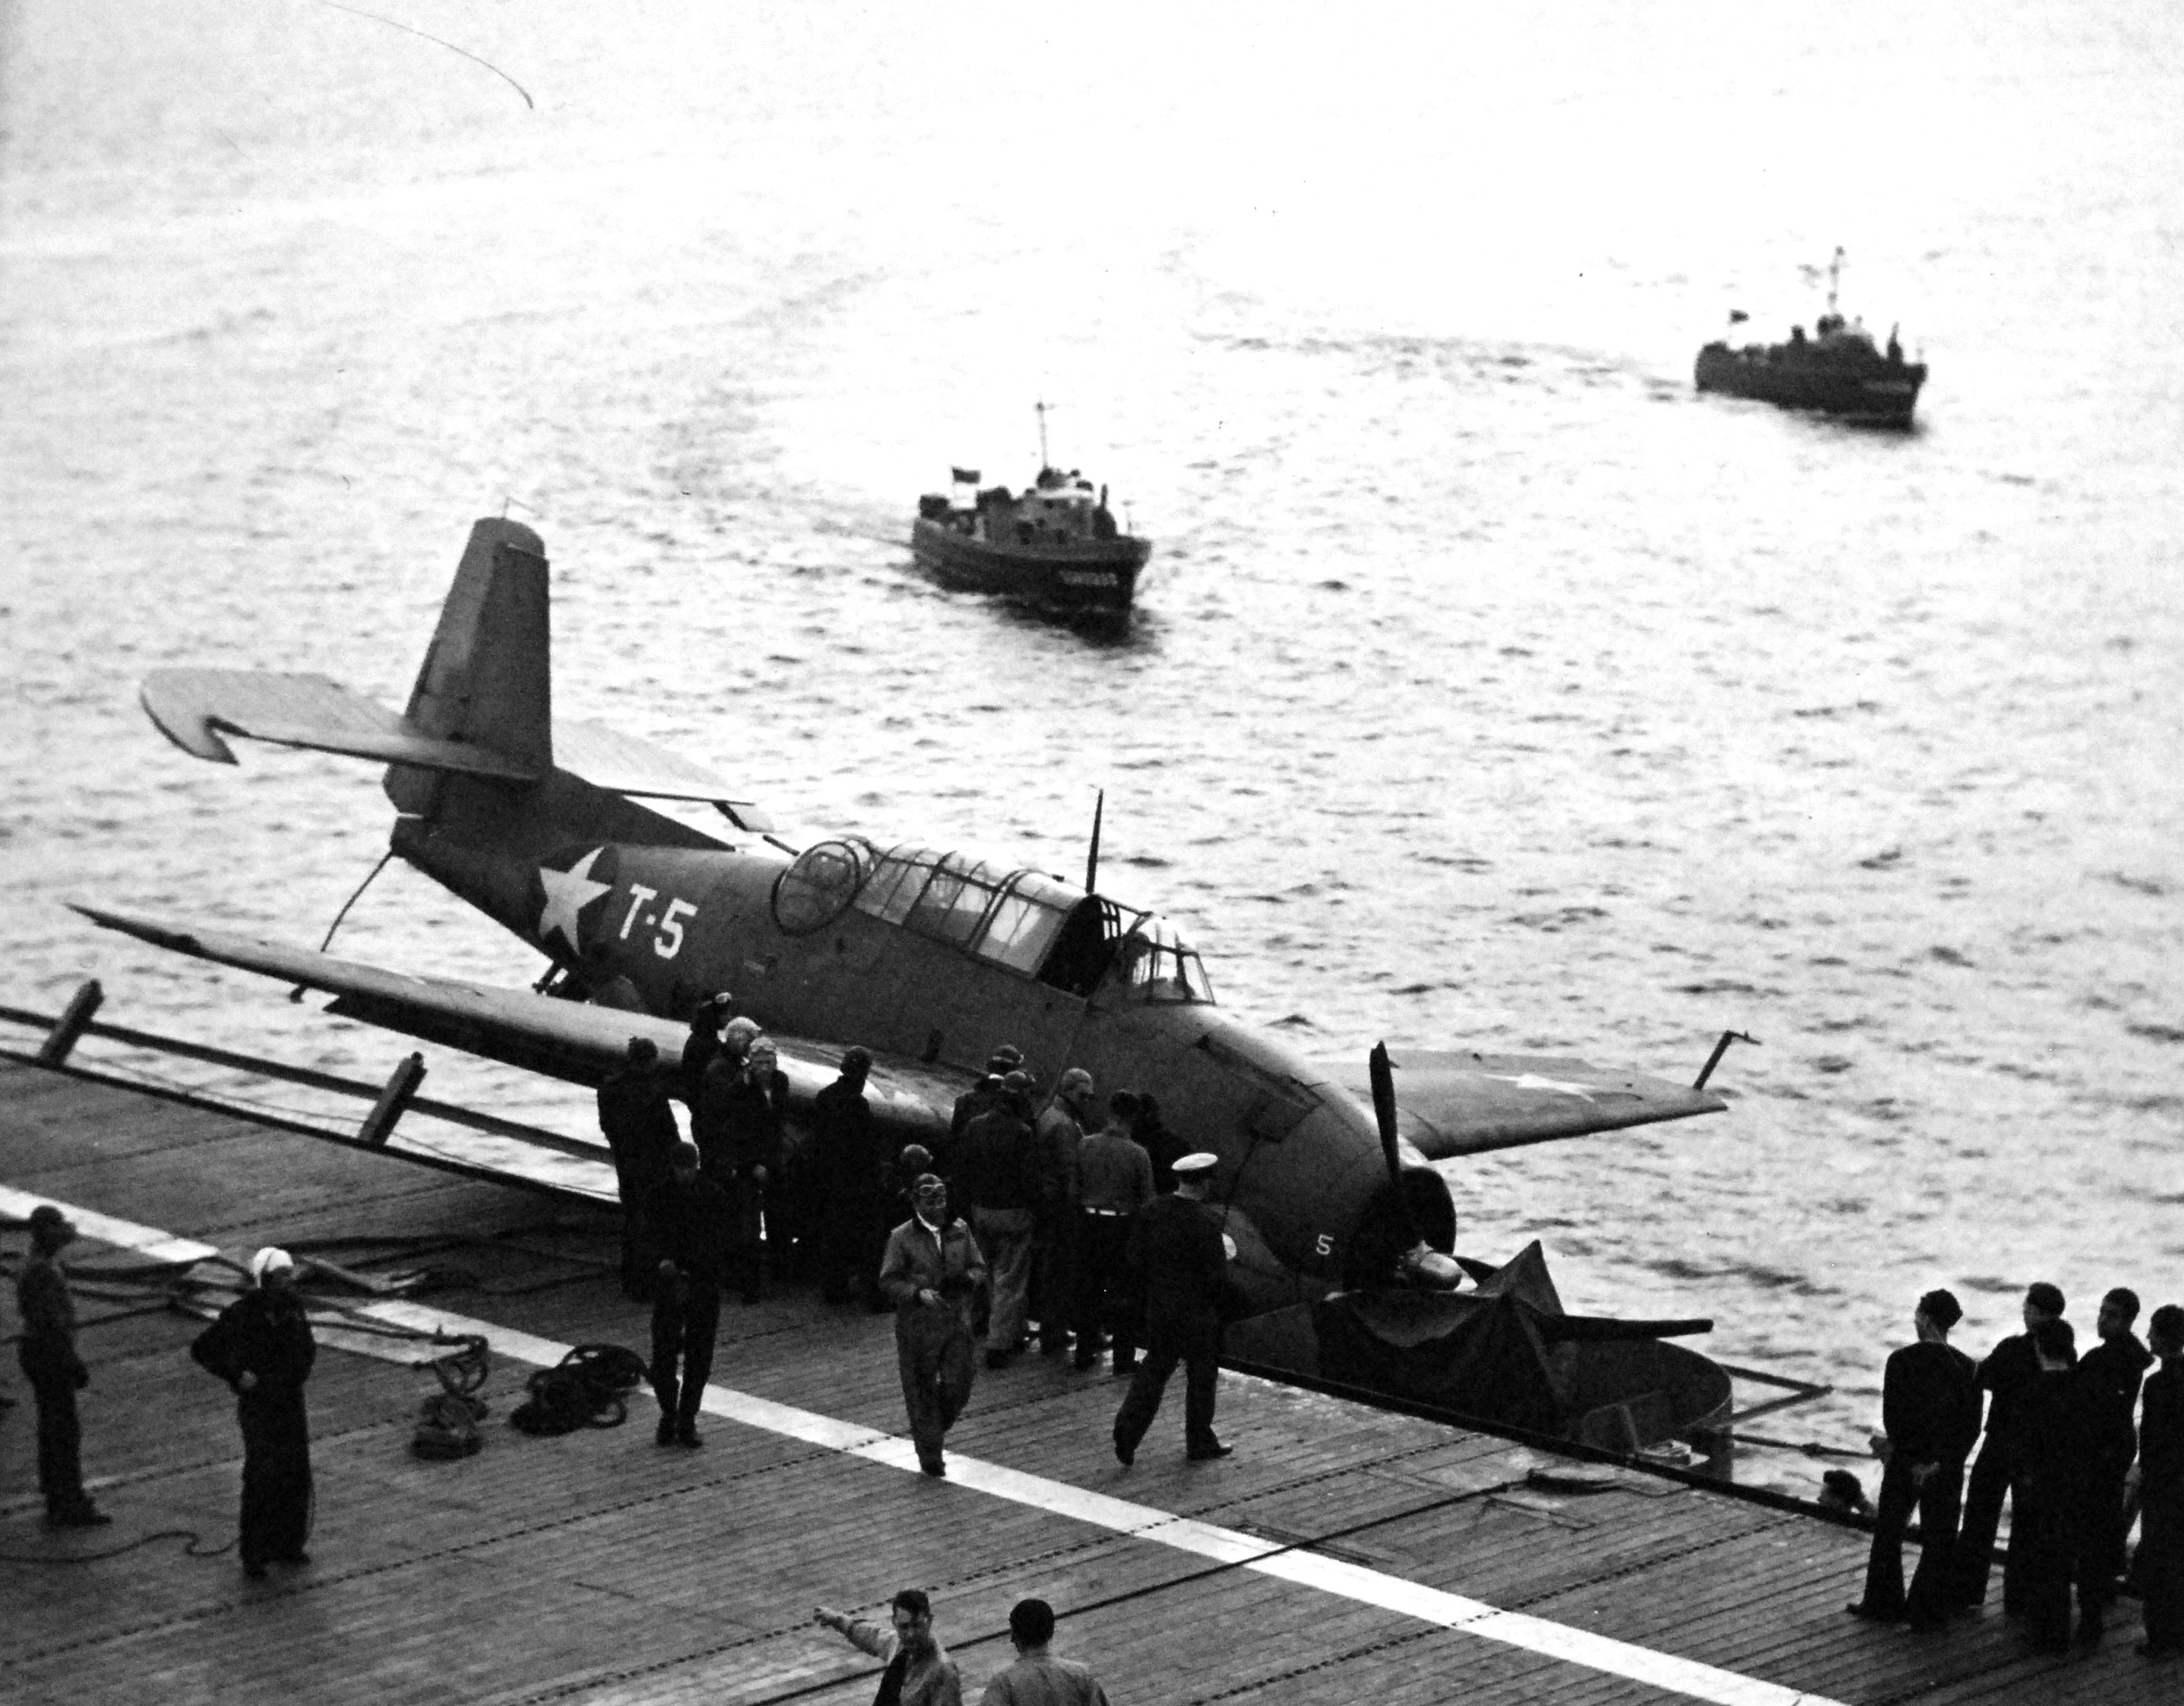 This TBF-1 Avenger attempted to land on the carrier USS Charger but missed the arresting wires and ended up tangled in the port catwalk, Chesapeake Bay, United States, 16 Mar 1943. Note US Coast Guard boats alongside.